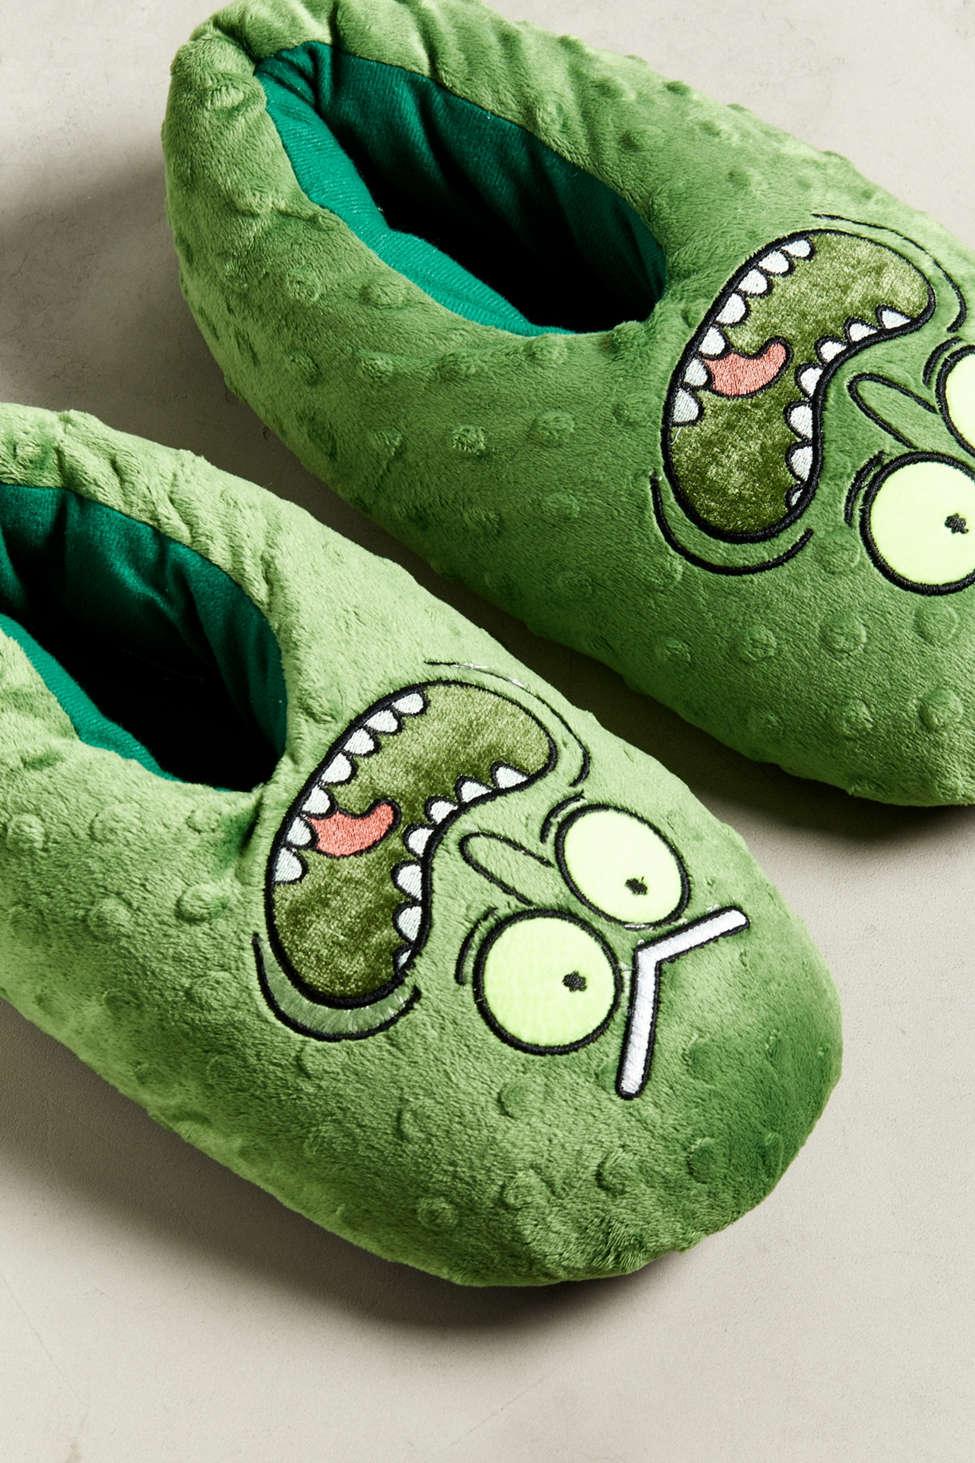 Urban Outfitters Pickle Rick Slipper in 